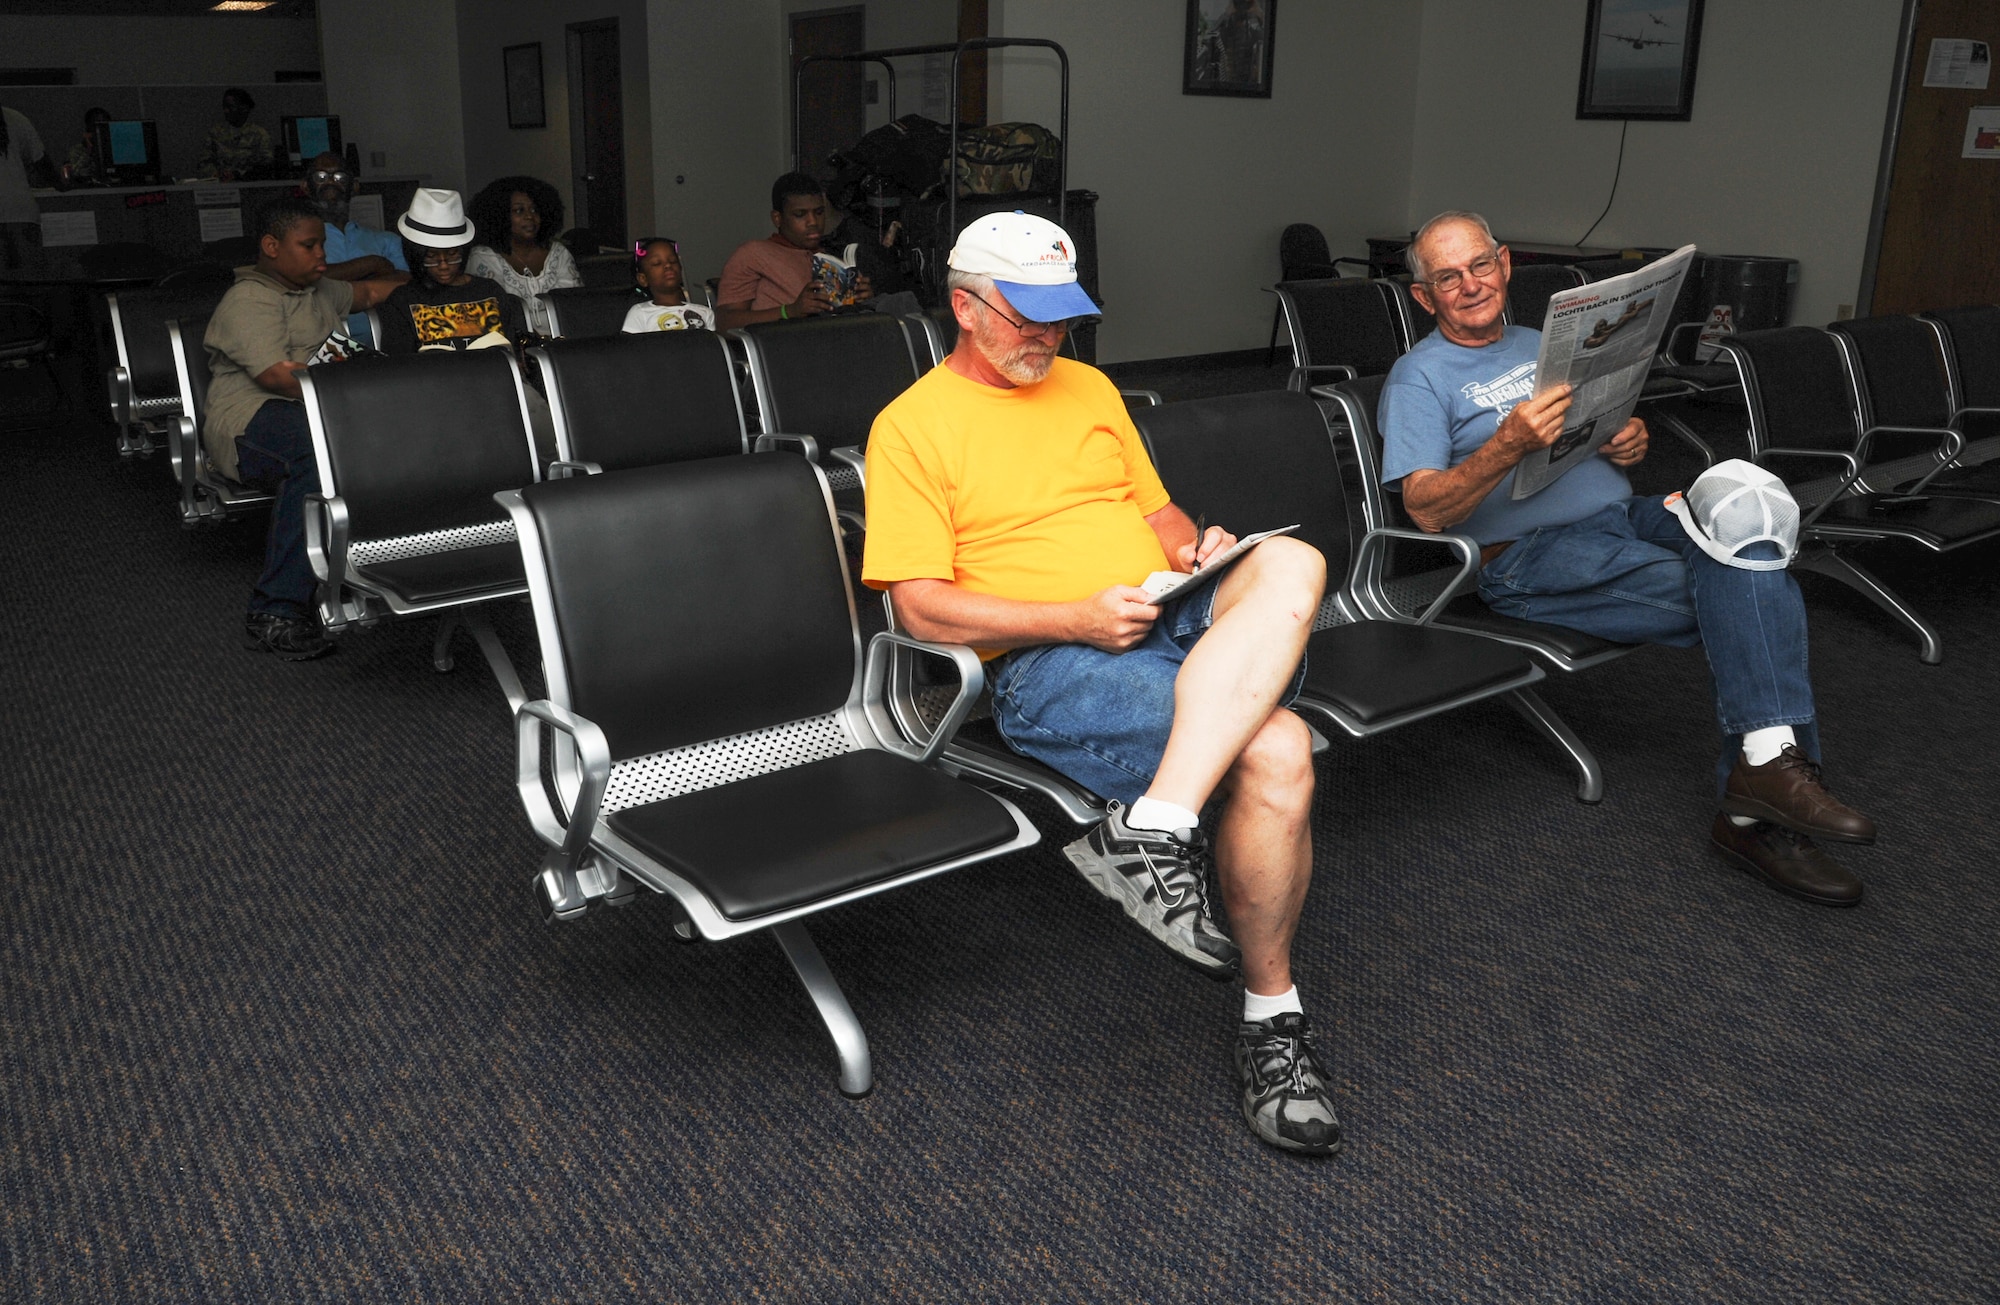 Customers sit in the Little Rock Air Force Base passenger terminal August 6, 2014, at Little Rock Air Force Base, Ark. Based on the amount of space available after mission priority cargo has been fulfilled, authorized military members, dependents, retirees, and Department of Defense civilians can fly on DOD owned or operated aircraft. (U.S. Air Force photo by Airman 1st Class Mercedes Muro)